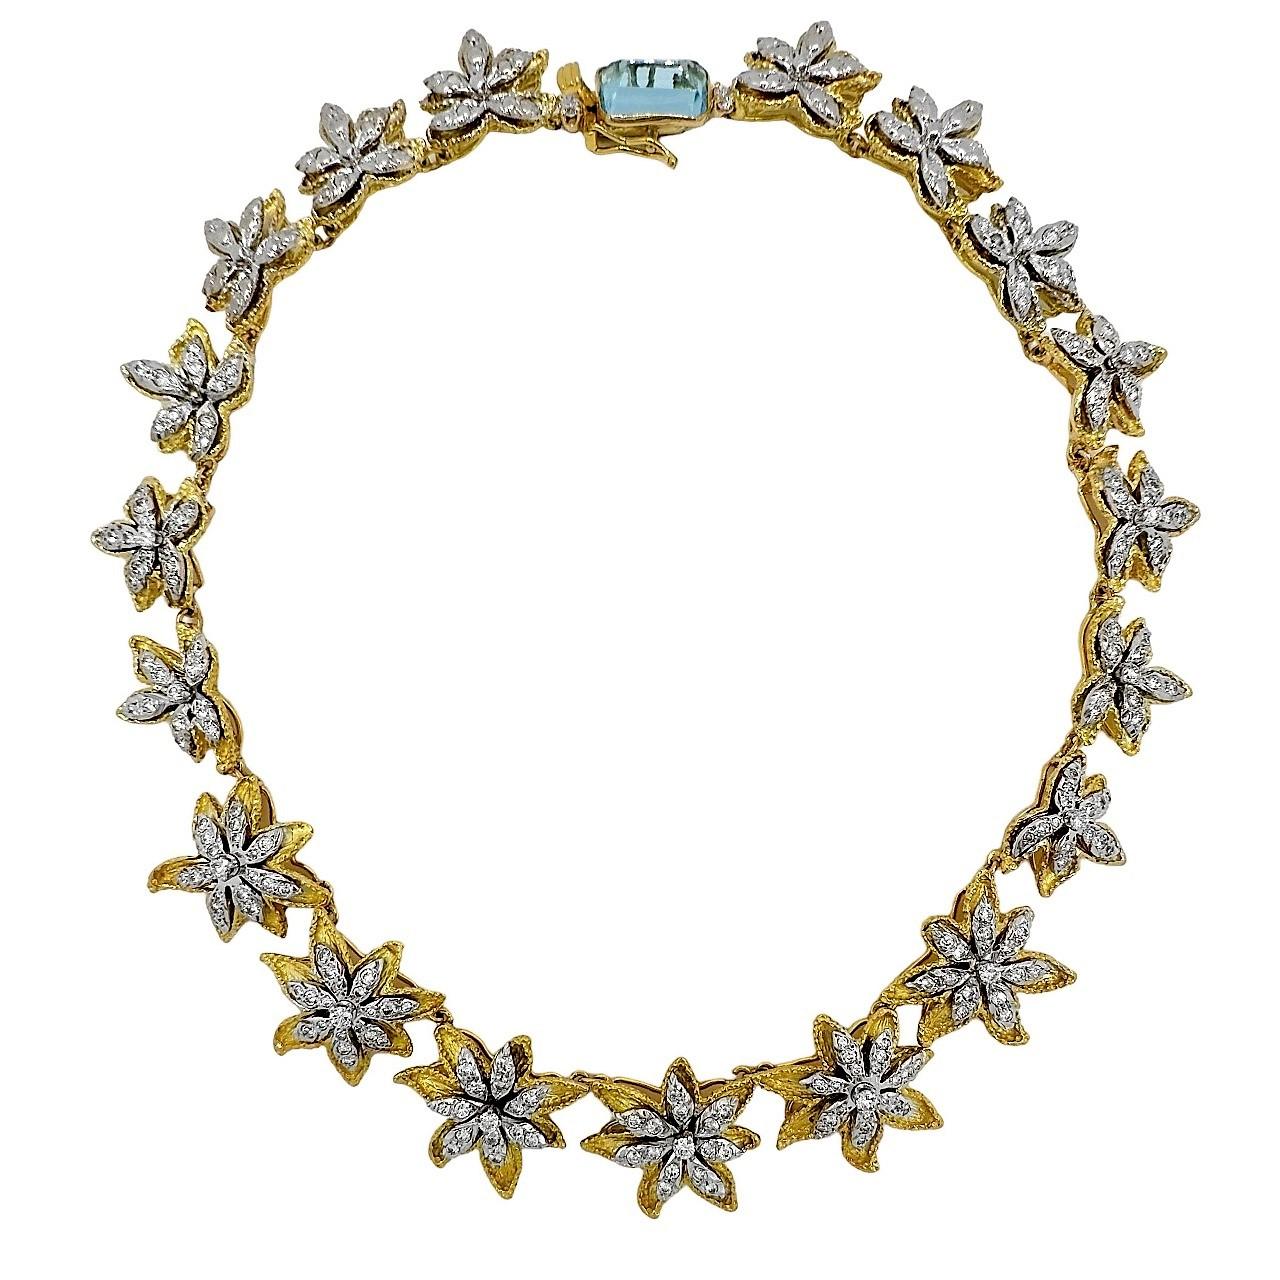 Modern Vintage 18k Yellow Gold Floral Motif Necklace with Diamonds